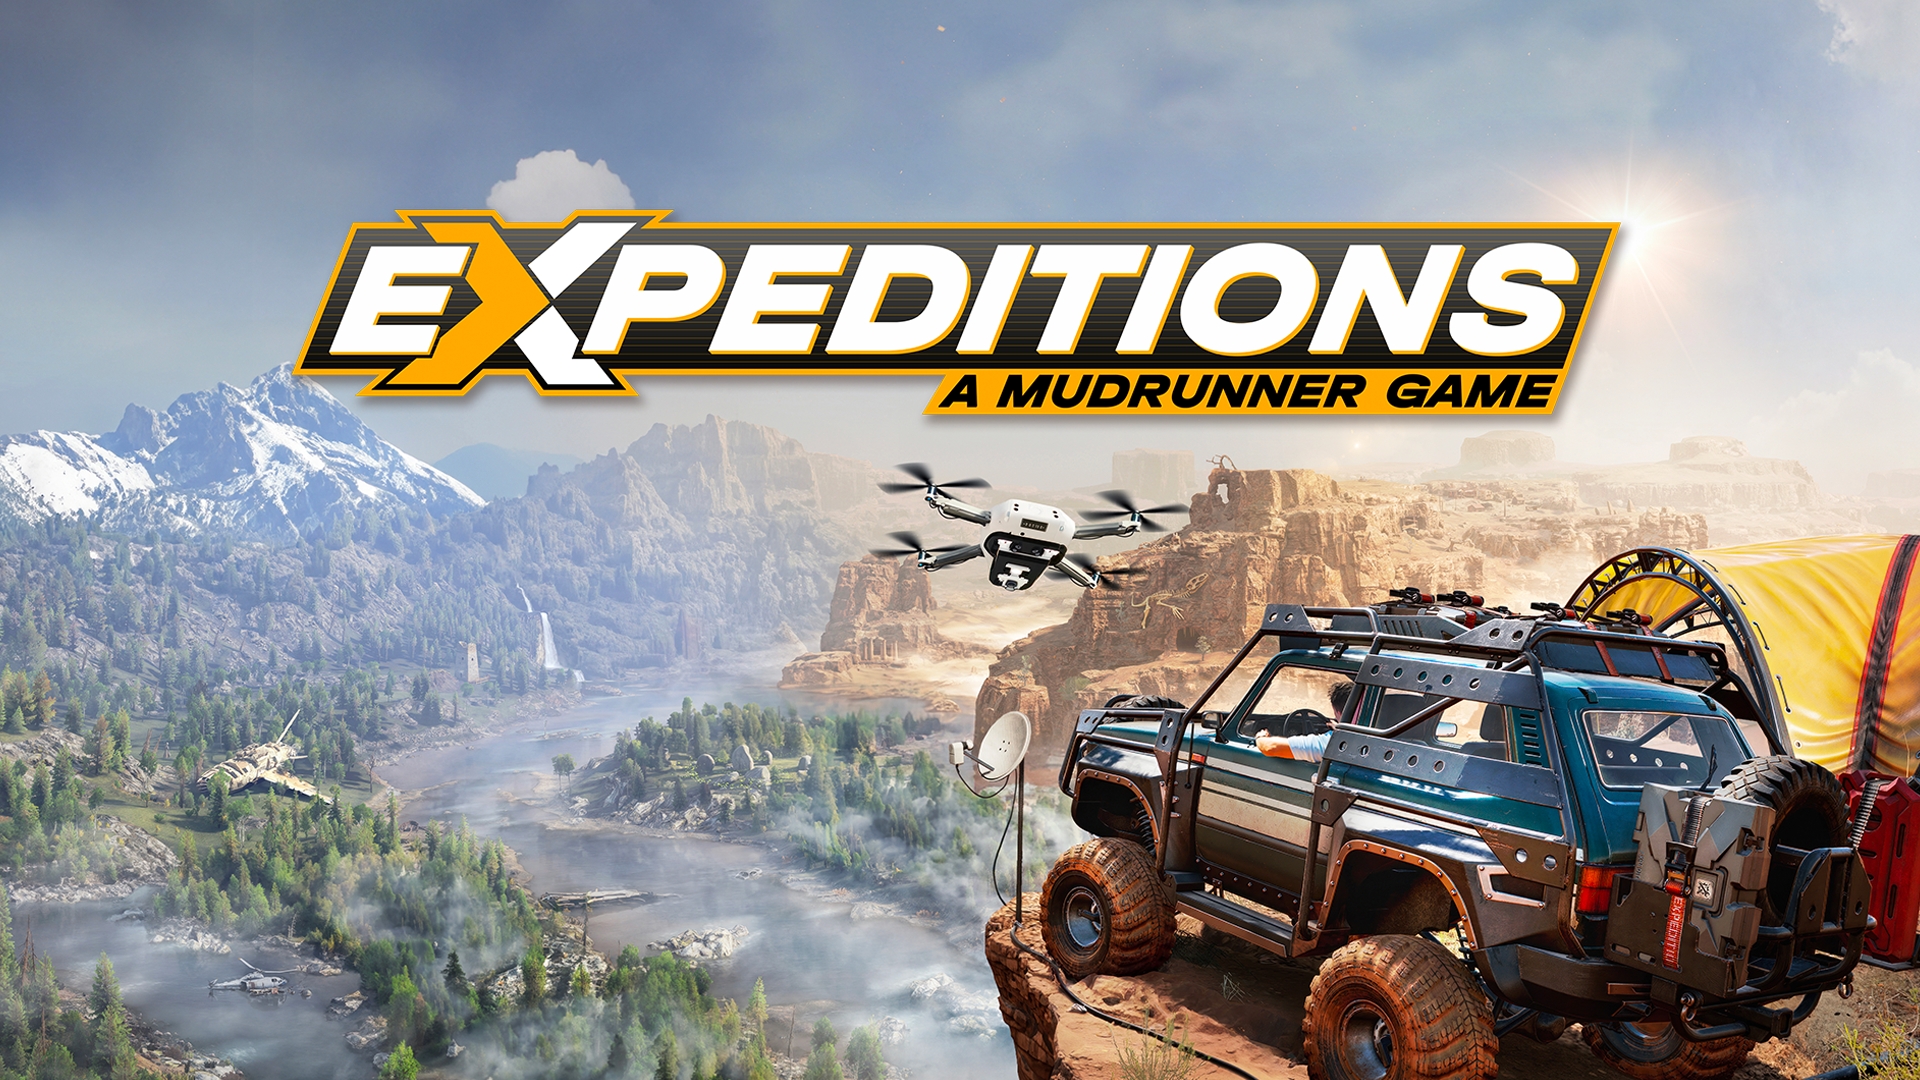 102767-expeditions-a-mudrunner-game-pc-spiel-steam-cover.jpeg